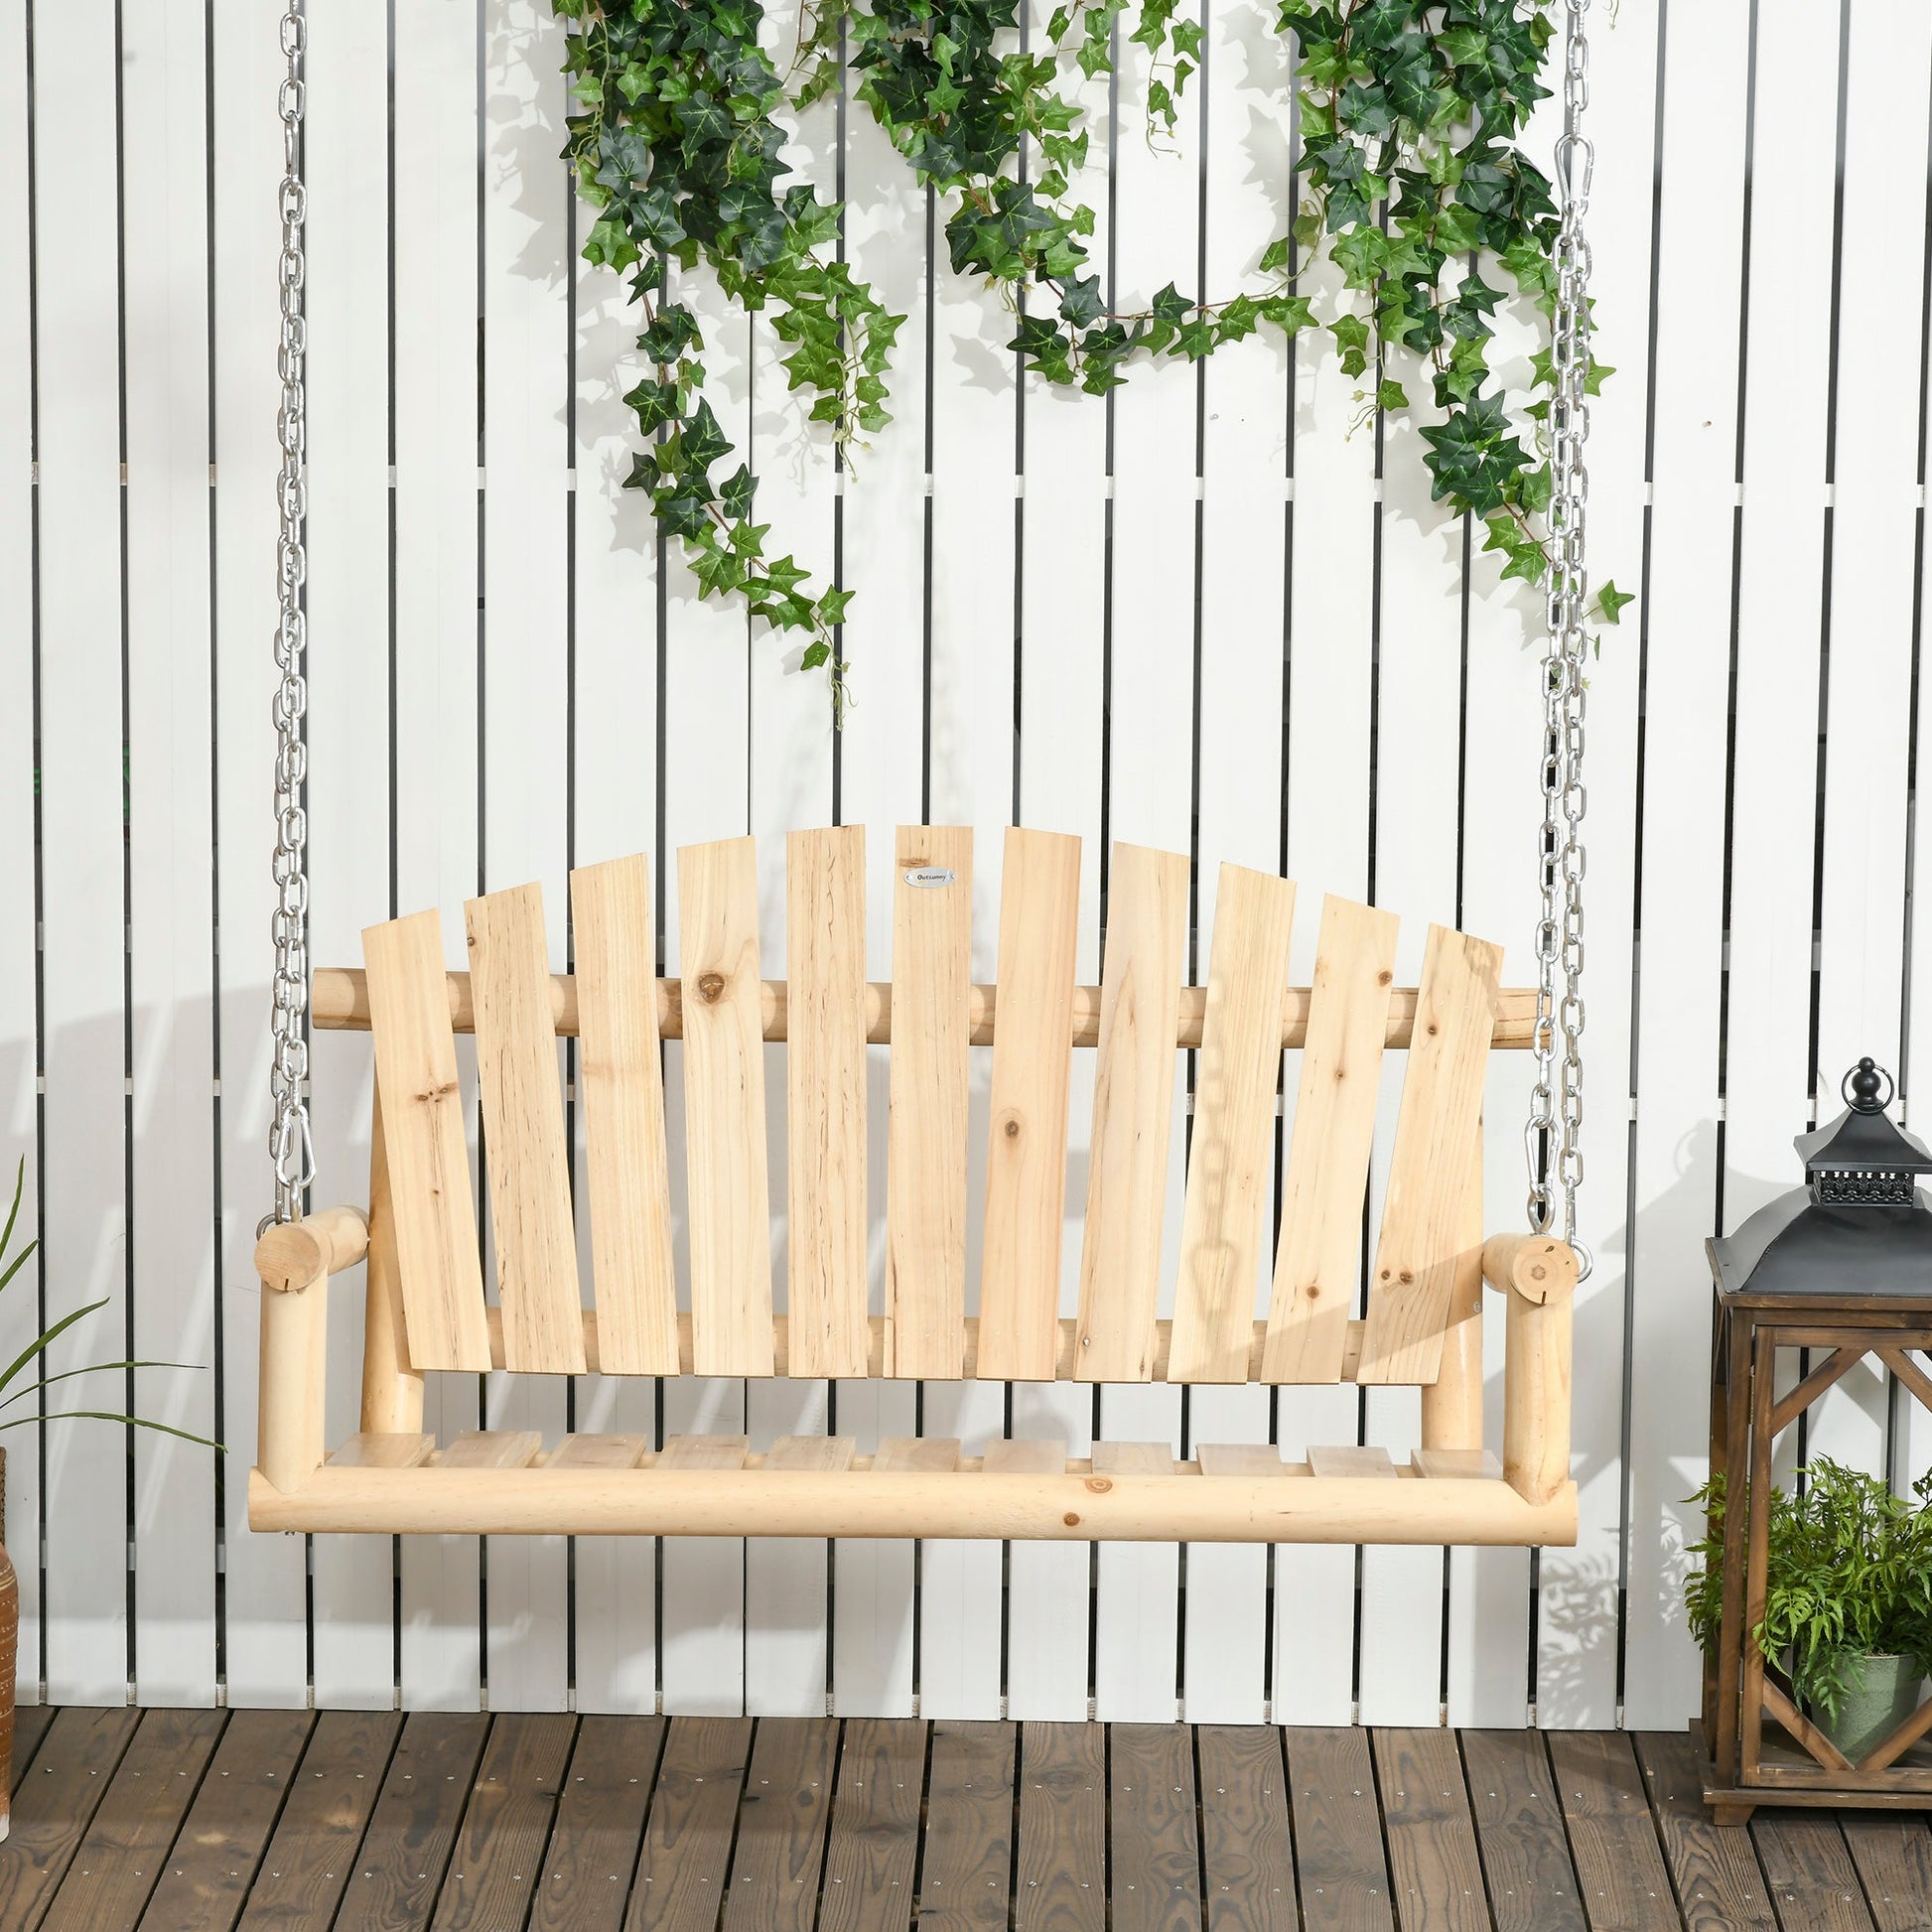 2-Seater Porch Swing, Hanging Outdoor Swing Bench with Metal Chains for Deck, Patio, Garden, Backyard at Gallery Canada